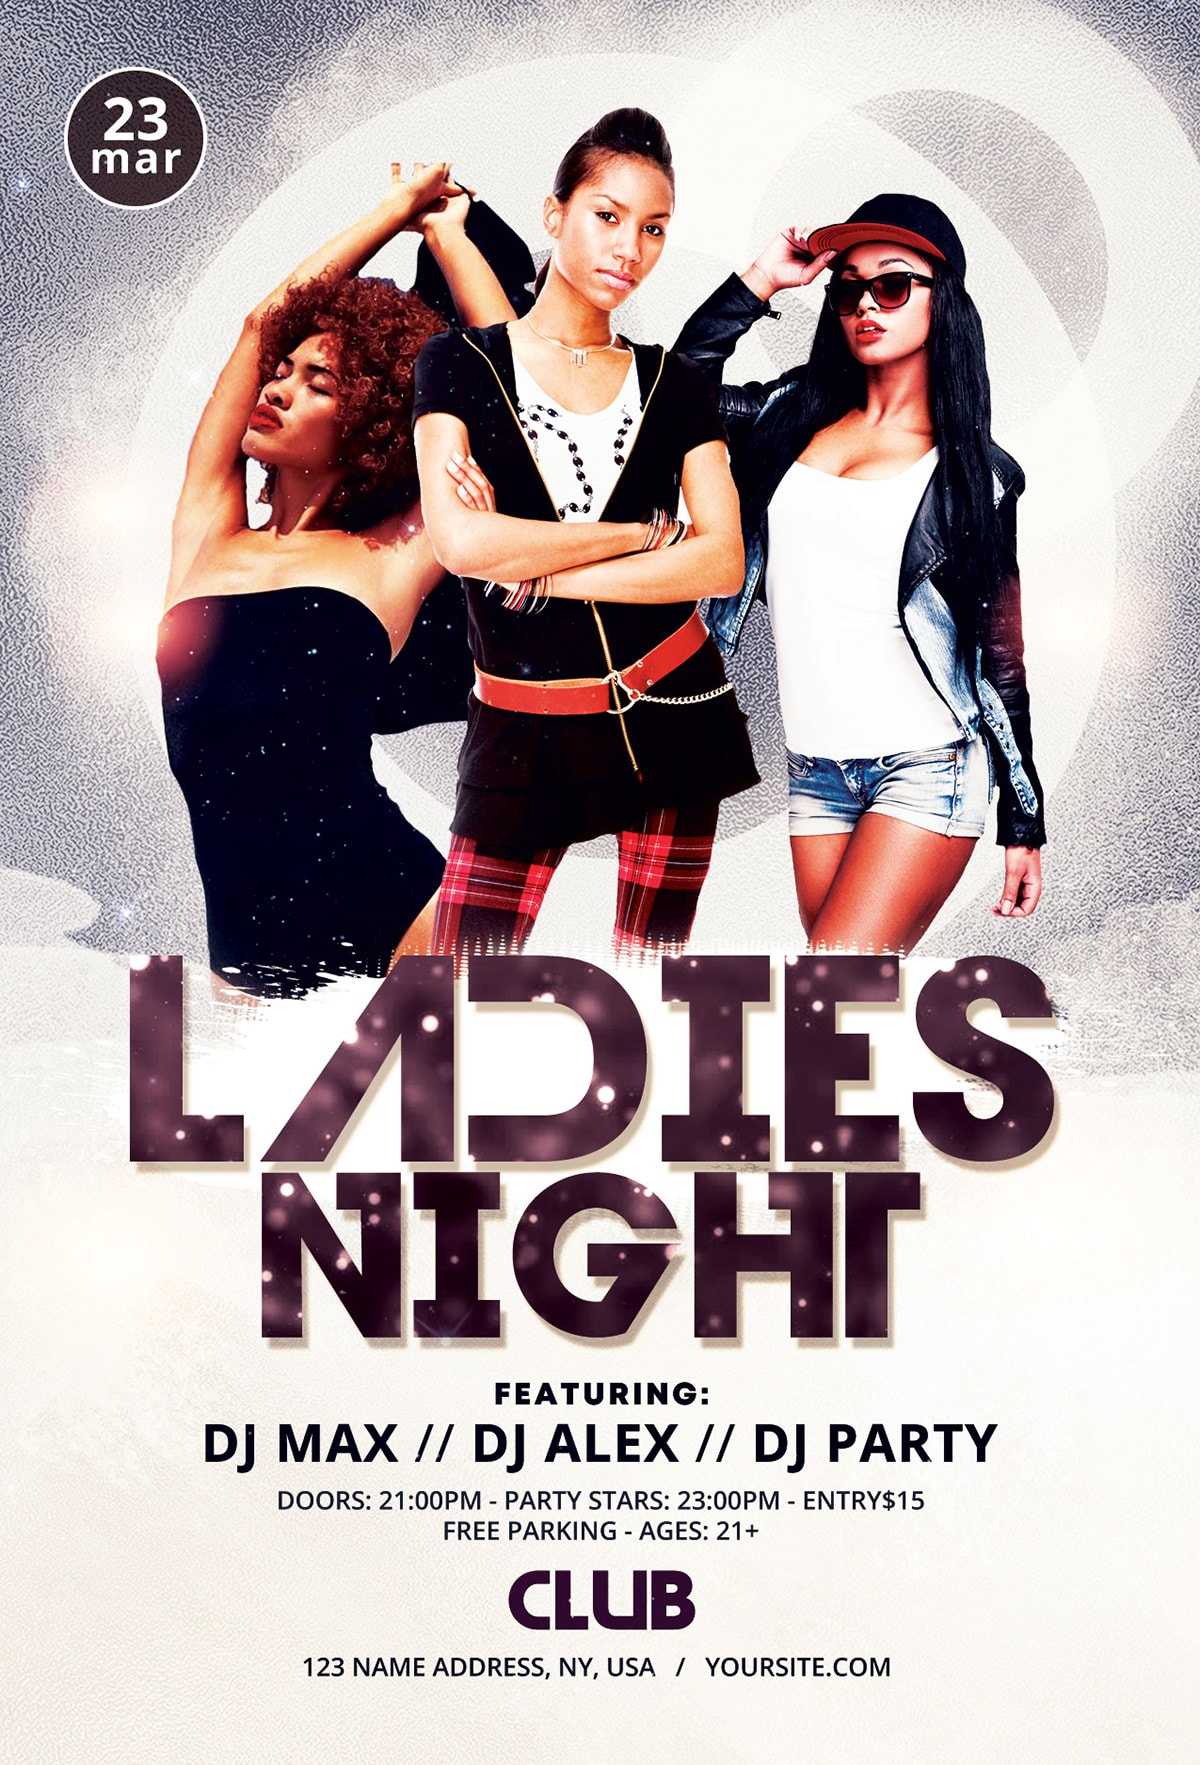 Ladies Night Free Psd Flyer Template Download – Psdflyer.co In Free Photography Flyer Templates Psd